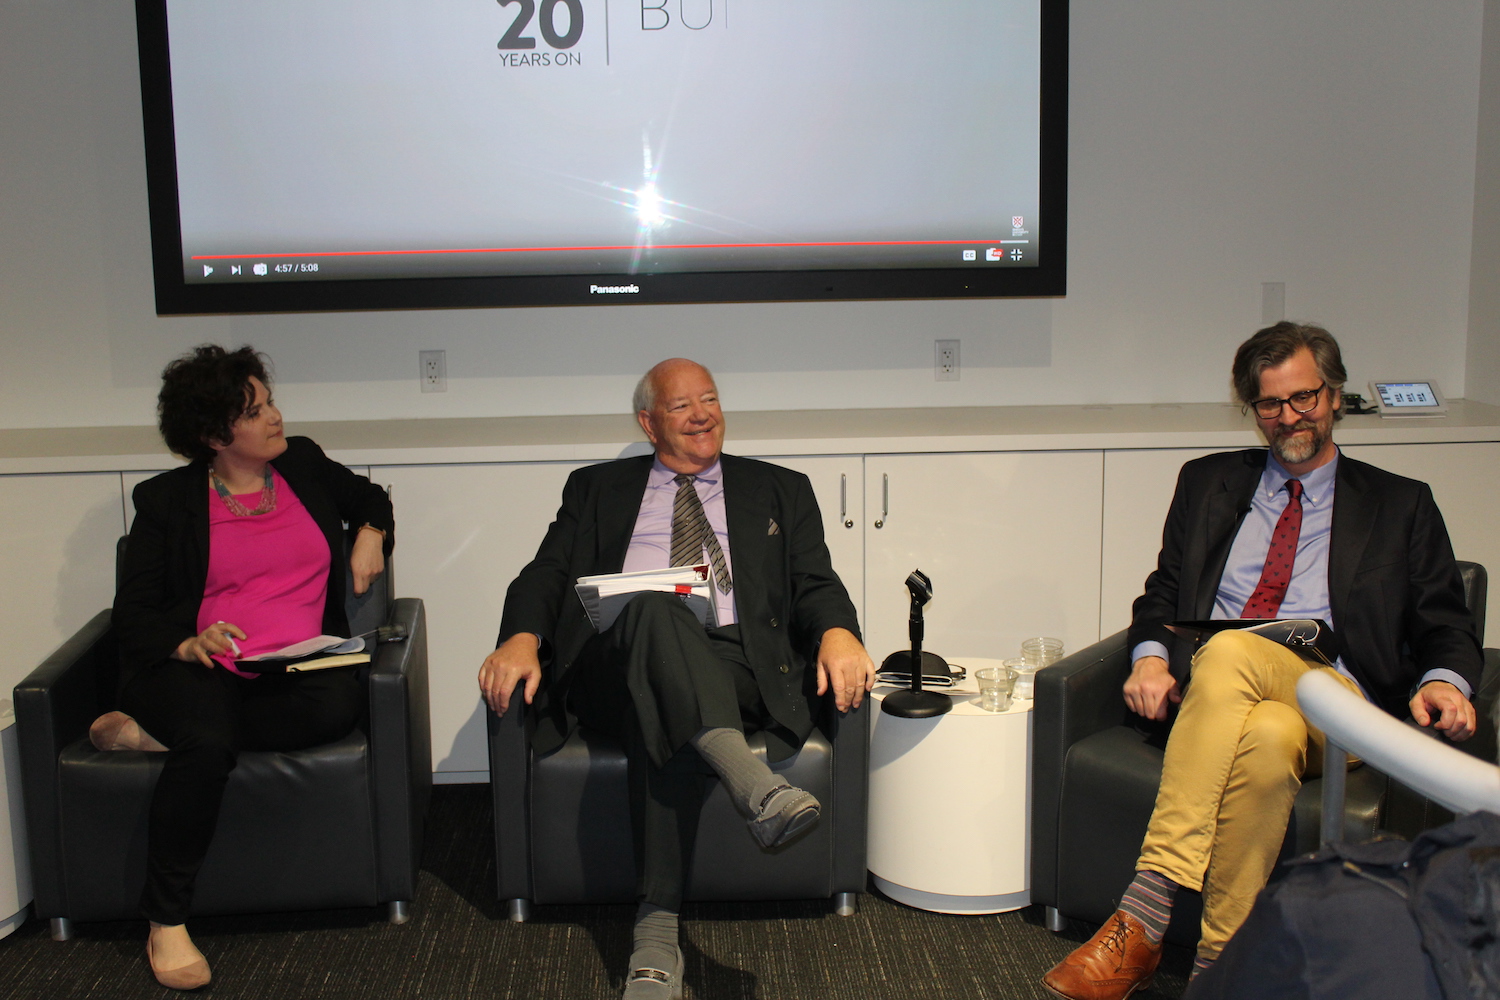 Claire, Finbar, and Dermot during the panel discussion of the 2018 Good Friday Agreement Commemoration